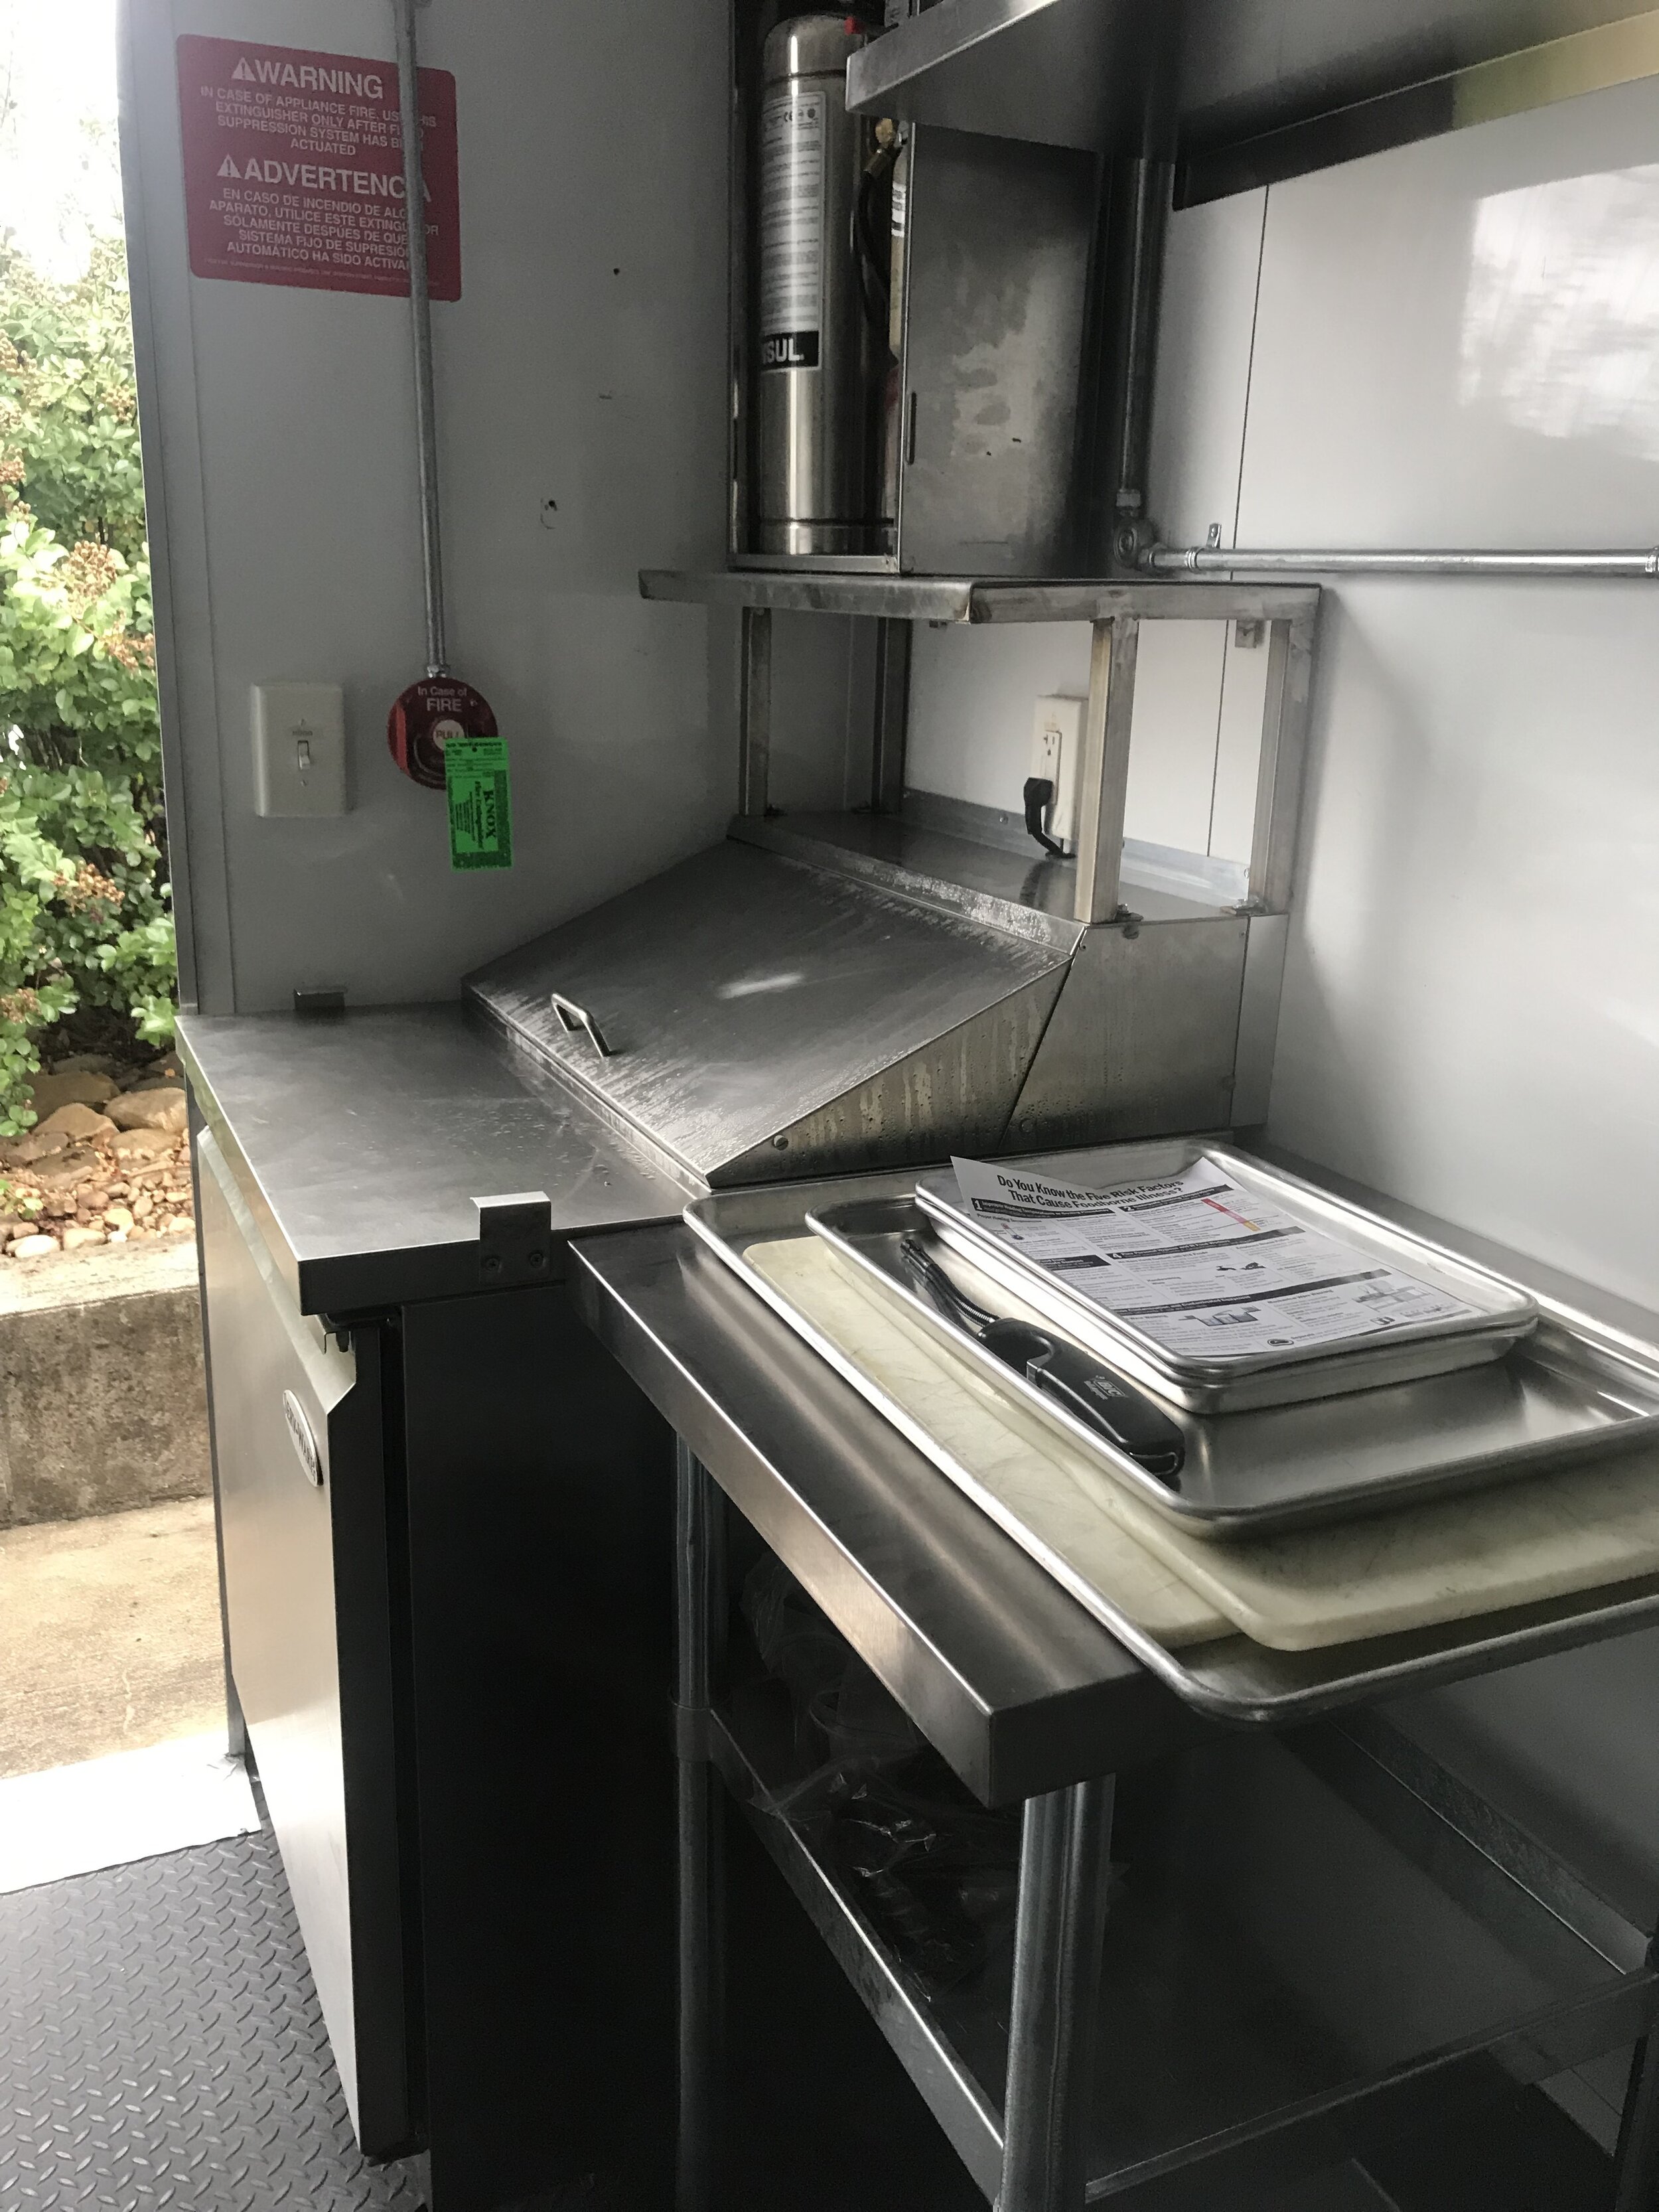  The sandwich station is above an under-the-counter refrigerator. A full-size refrigerator is at the other end of the mobile kitchen.  